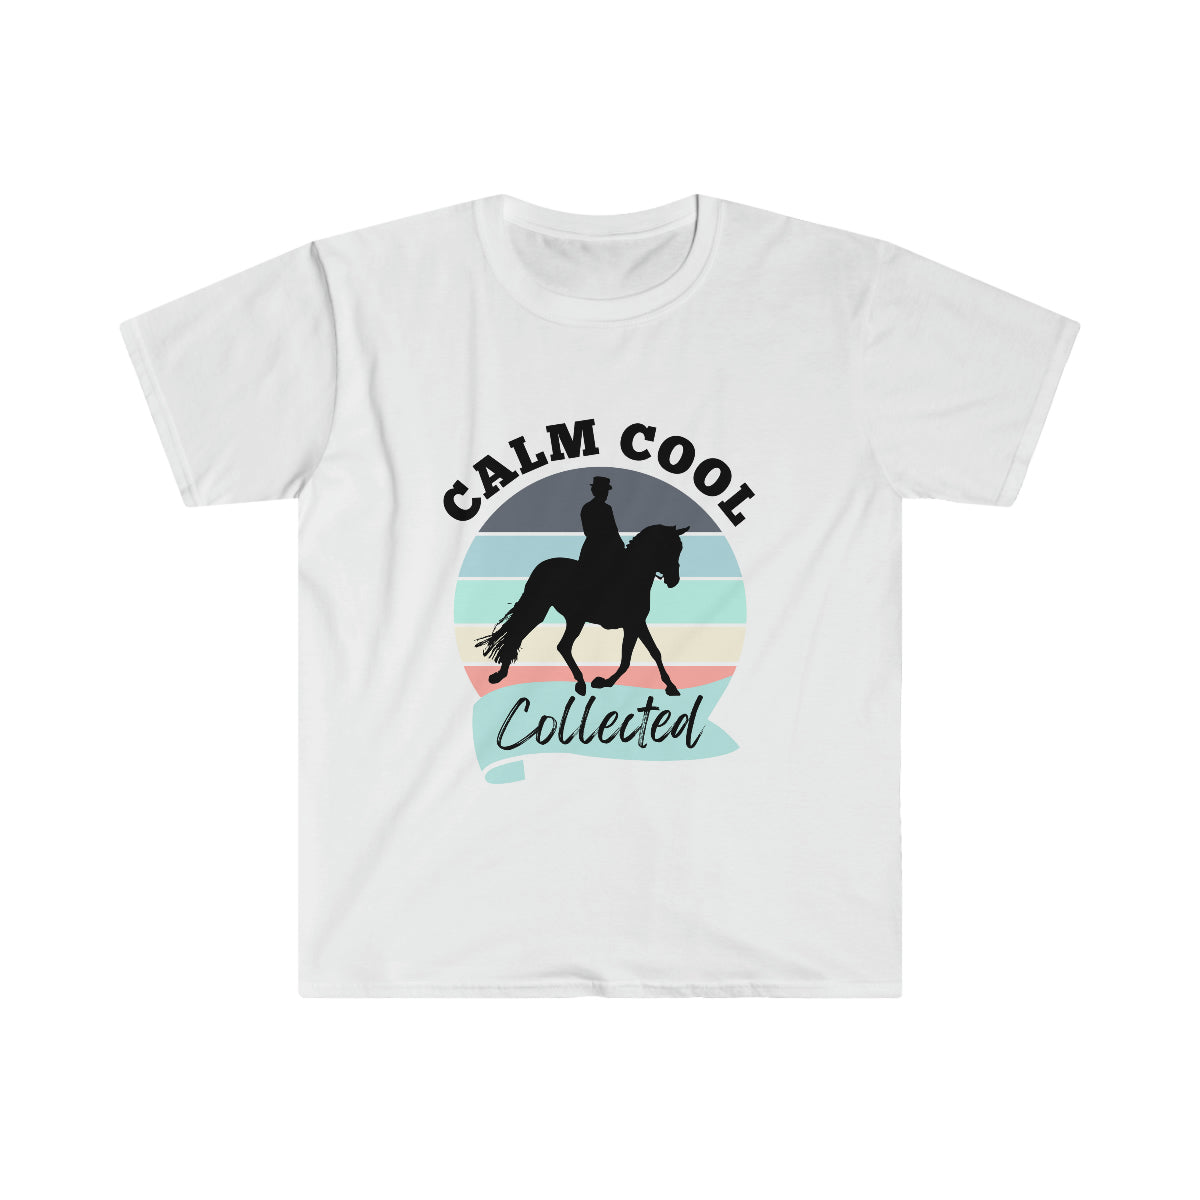 Calm Cool Collected Dressage Horse T-Shirt